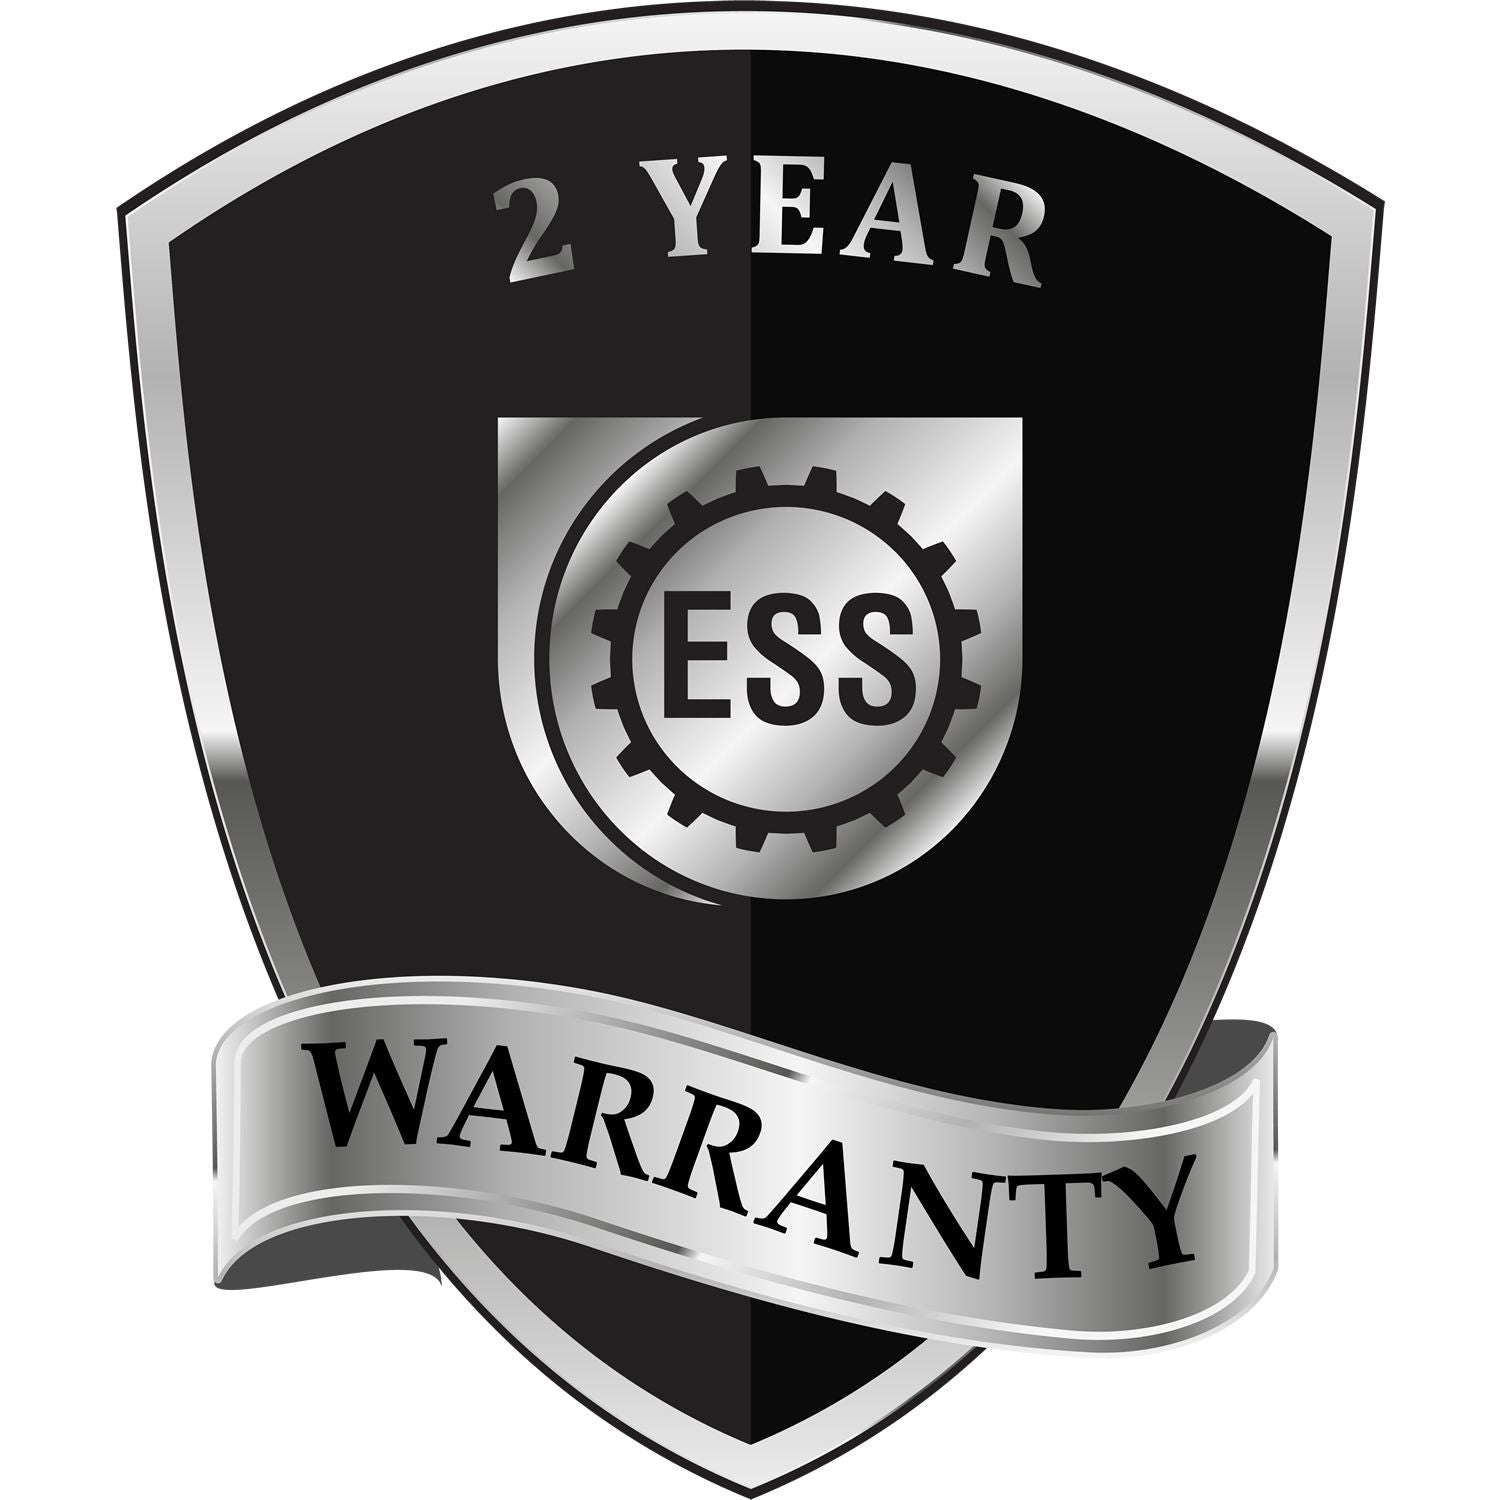 A black and silver badge or emblem showing warranty information for the Long Reach Arizona Geology Seal